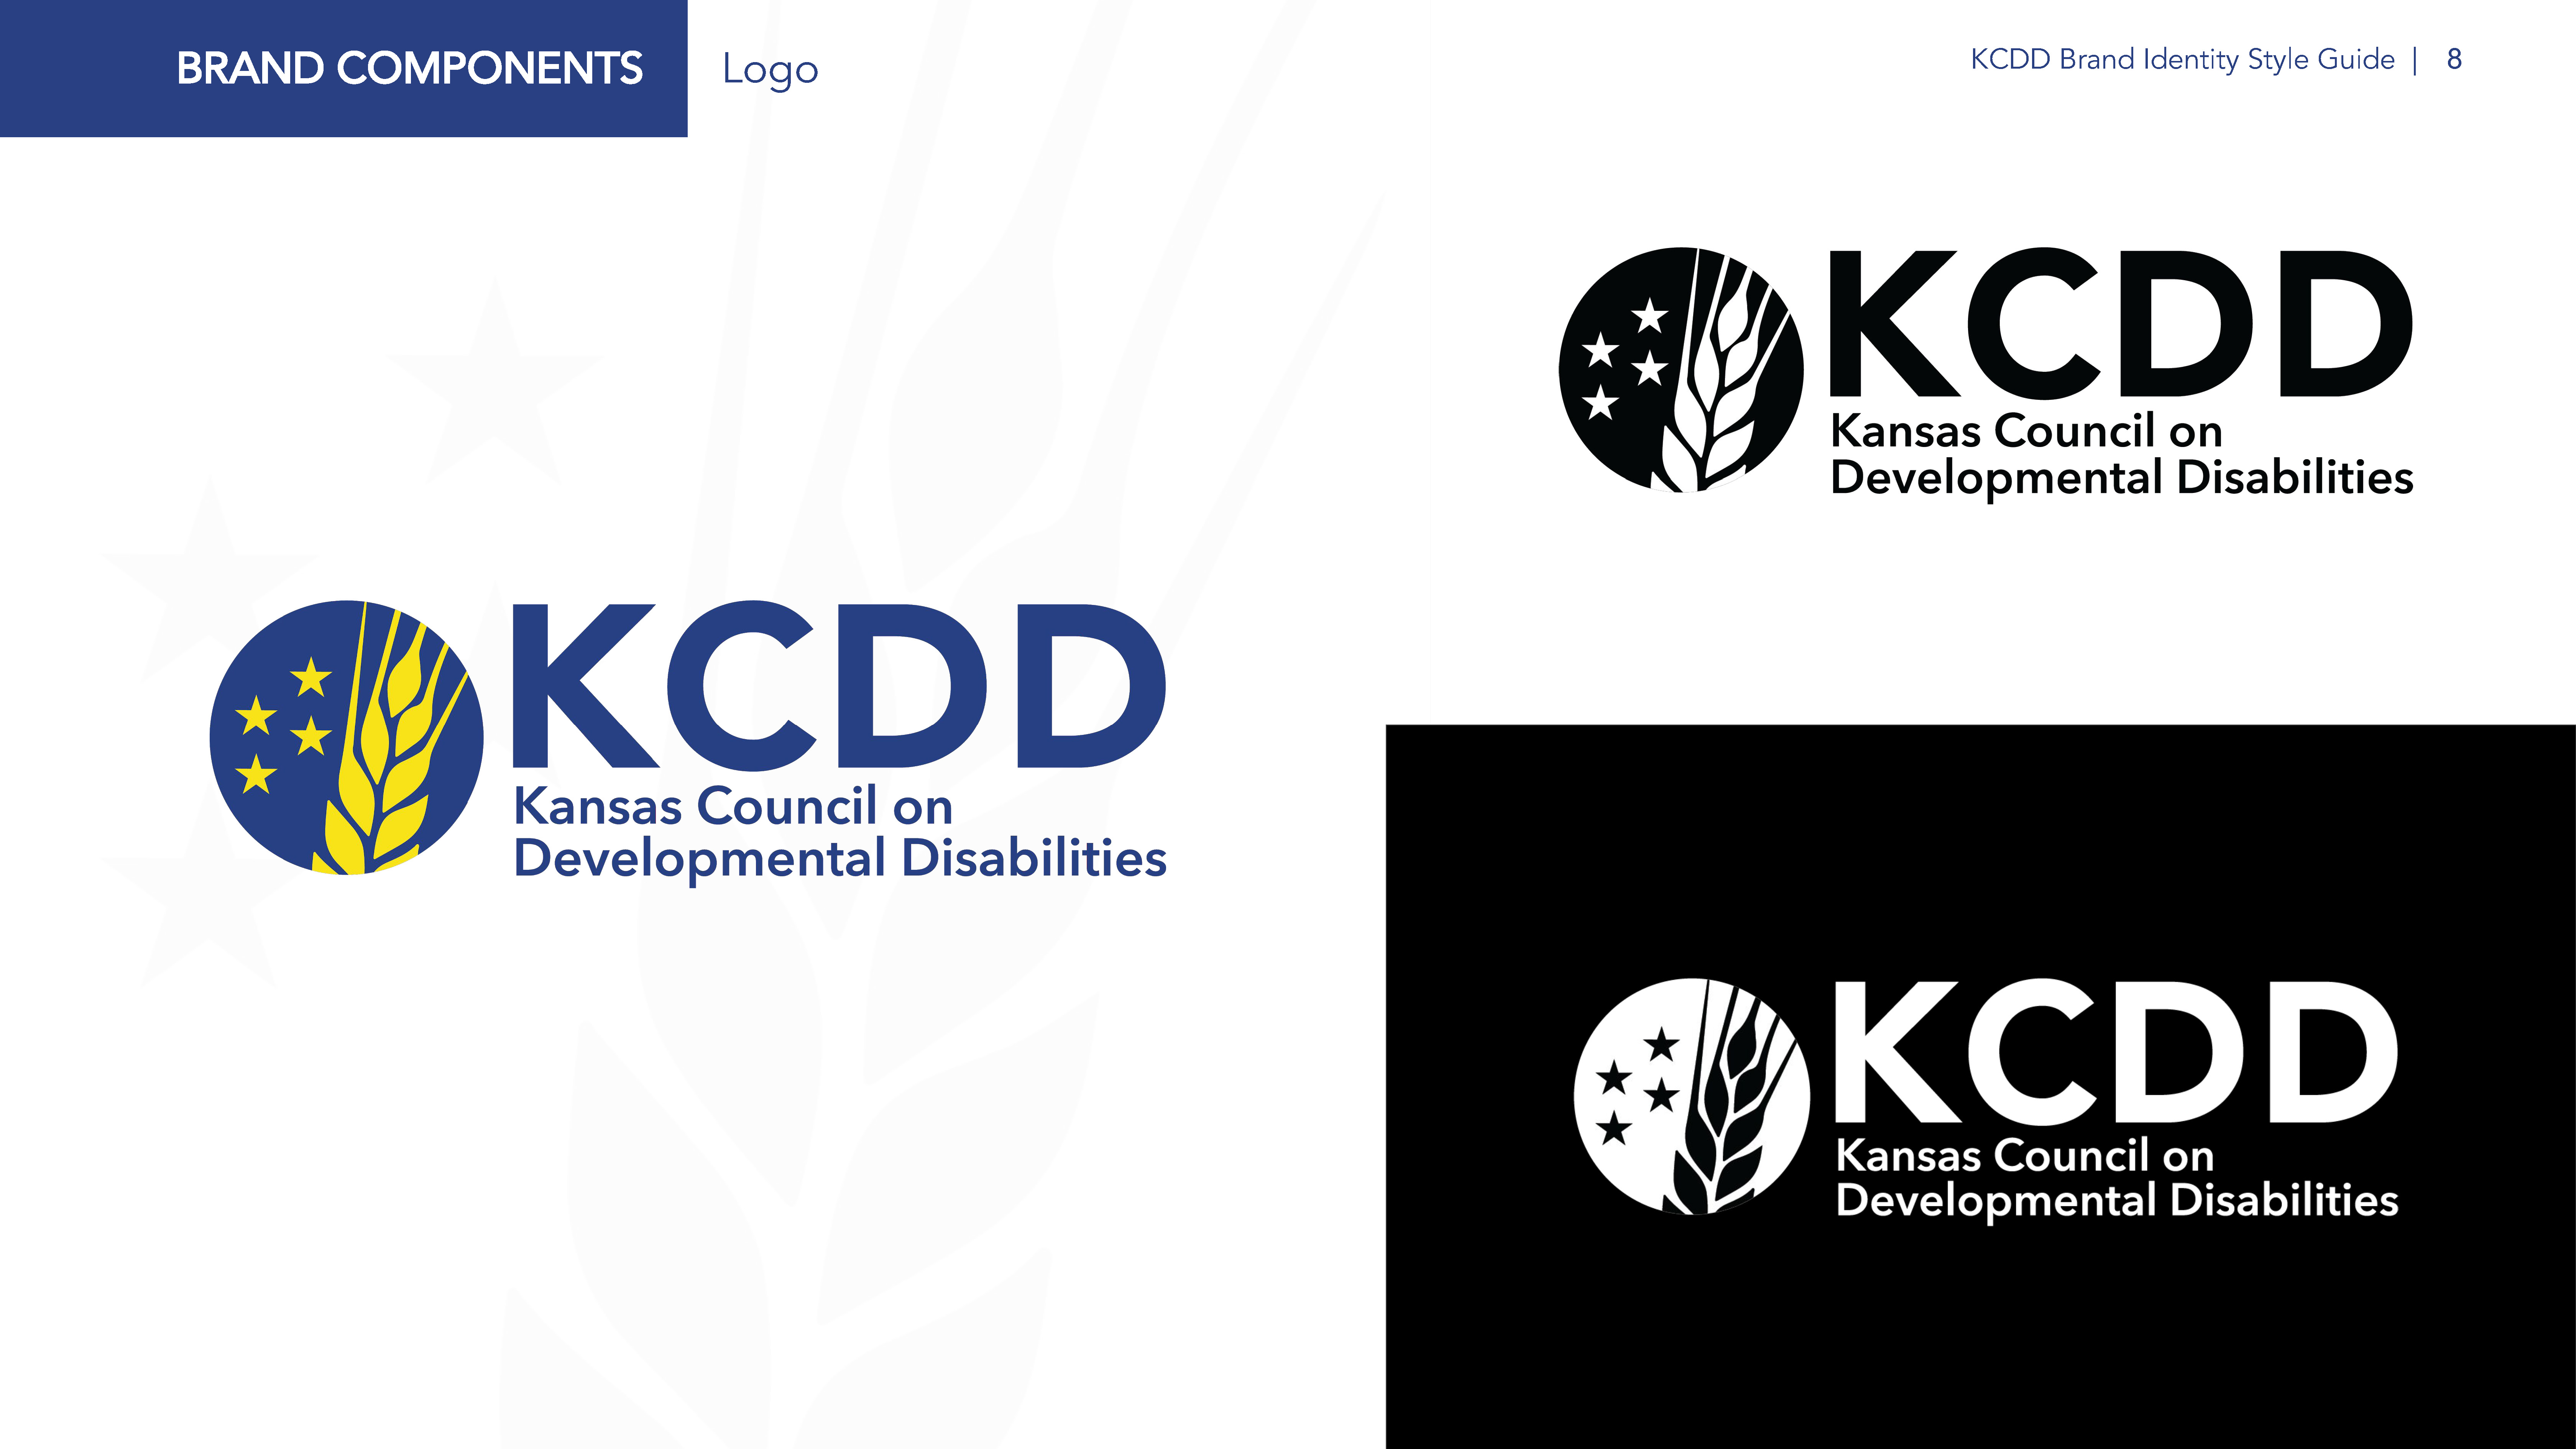 KCDD - KCDD Brand Identity Style Guide Page 08 - New Minds Group